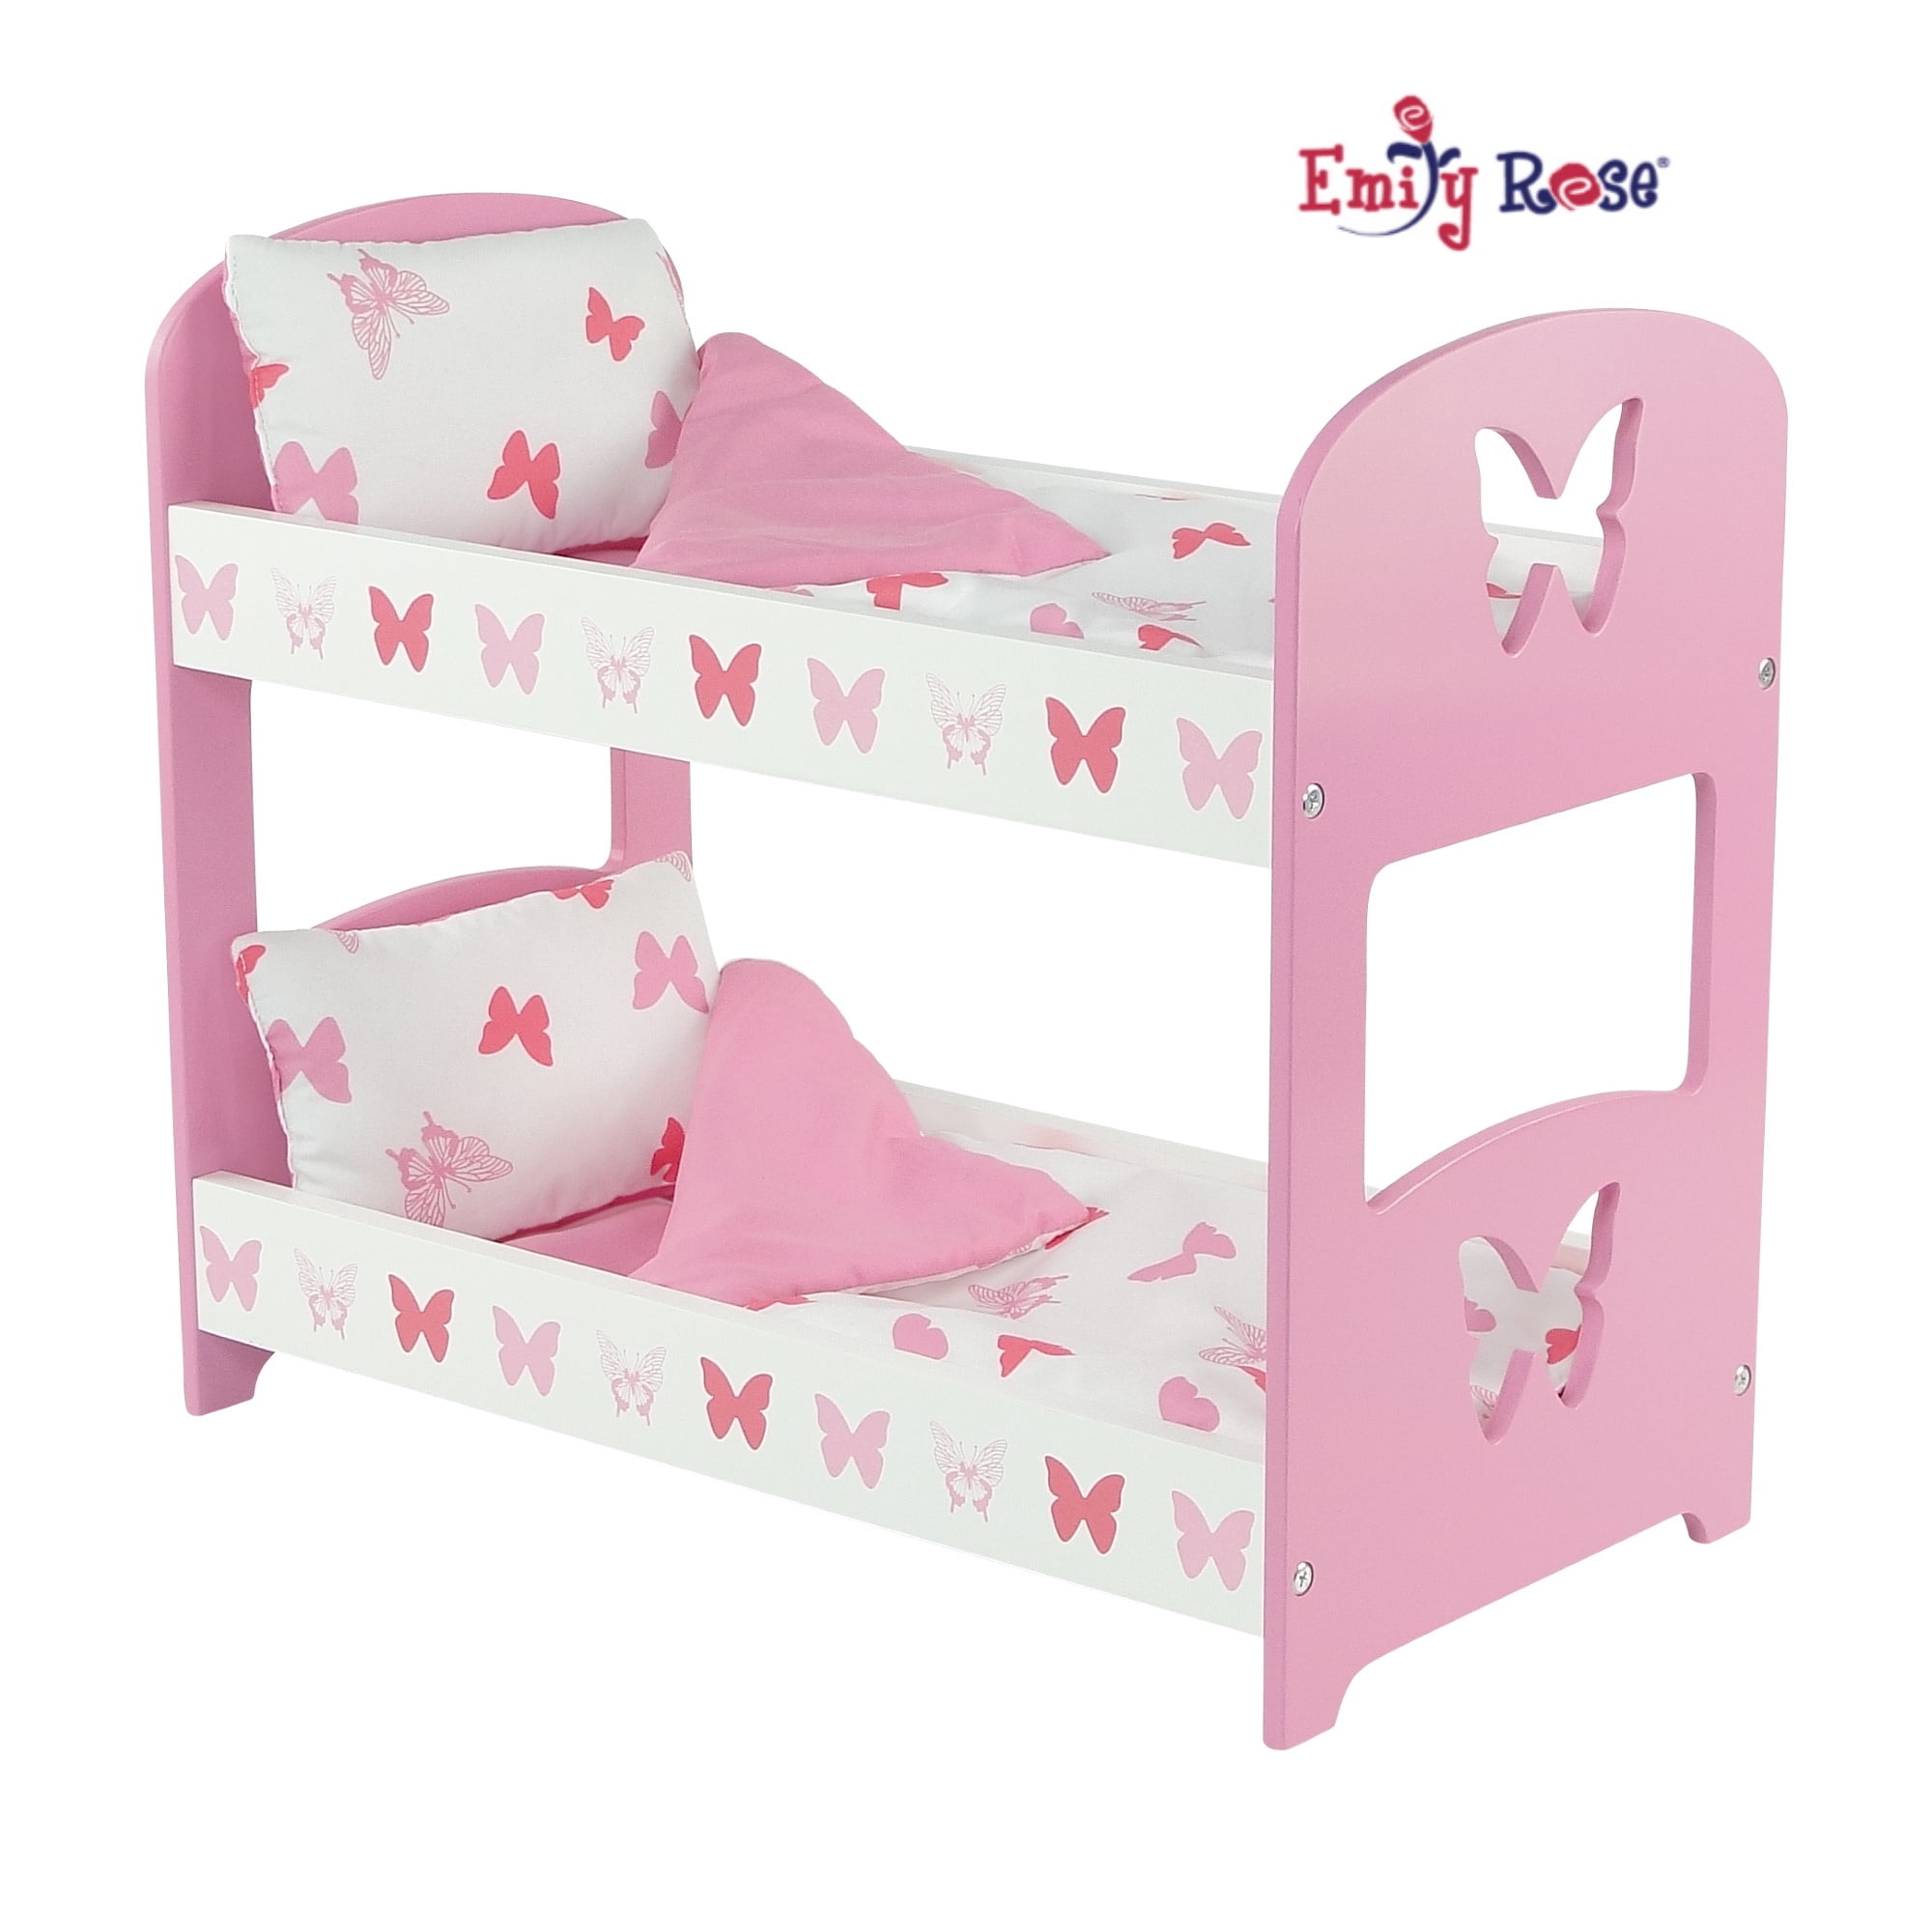 Emily Rose 18 Inch Doll Bed Com, Wooden Bunk Beds For 18 Dolls